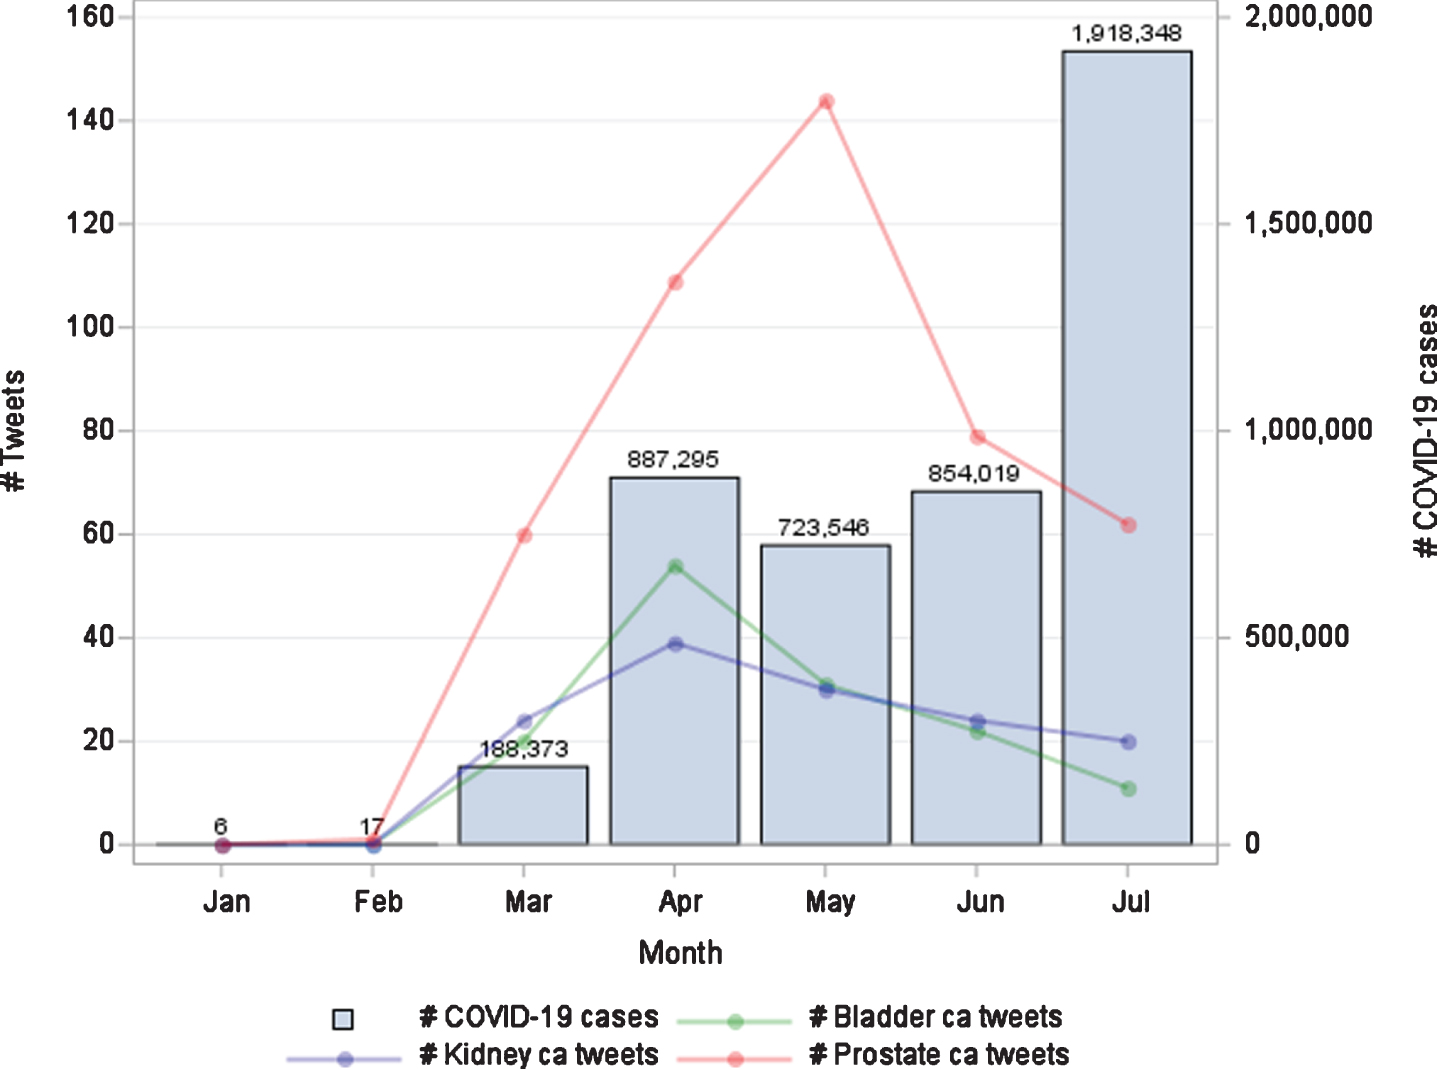 Temporal tracking of newly diagnosed U.S. COVID-19 cases and specified genitourinary related tweets from January through July of 2020.